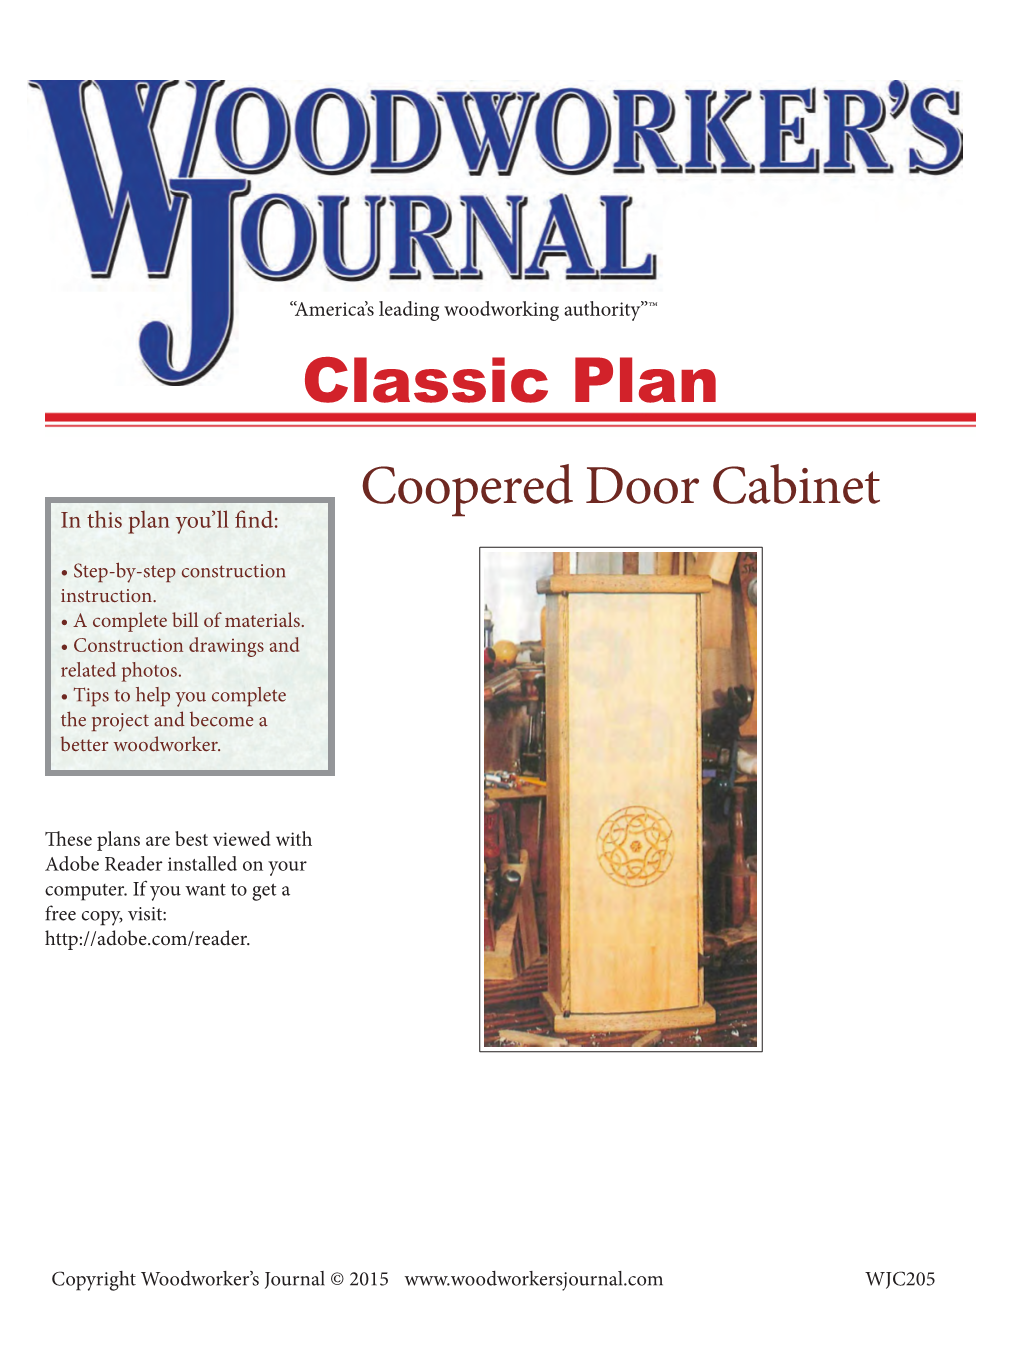 Classic Plan Coopered Door Cabinet in This Plan You’Ll Find